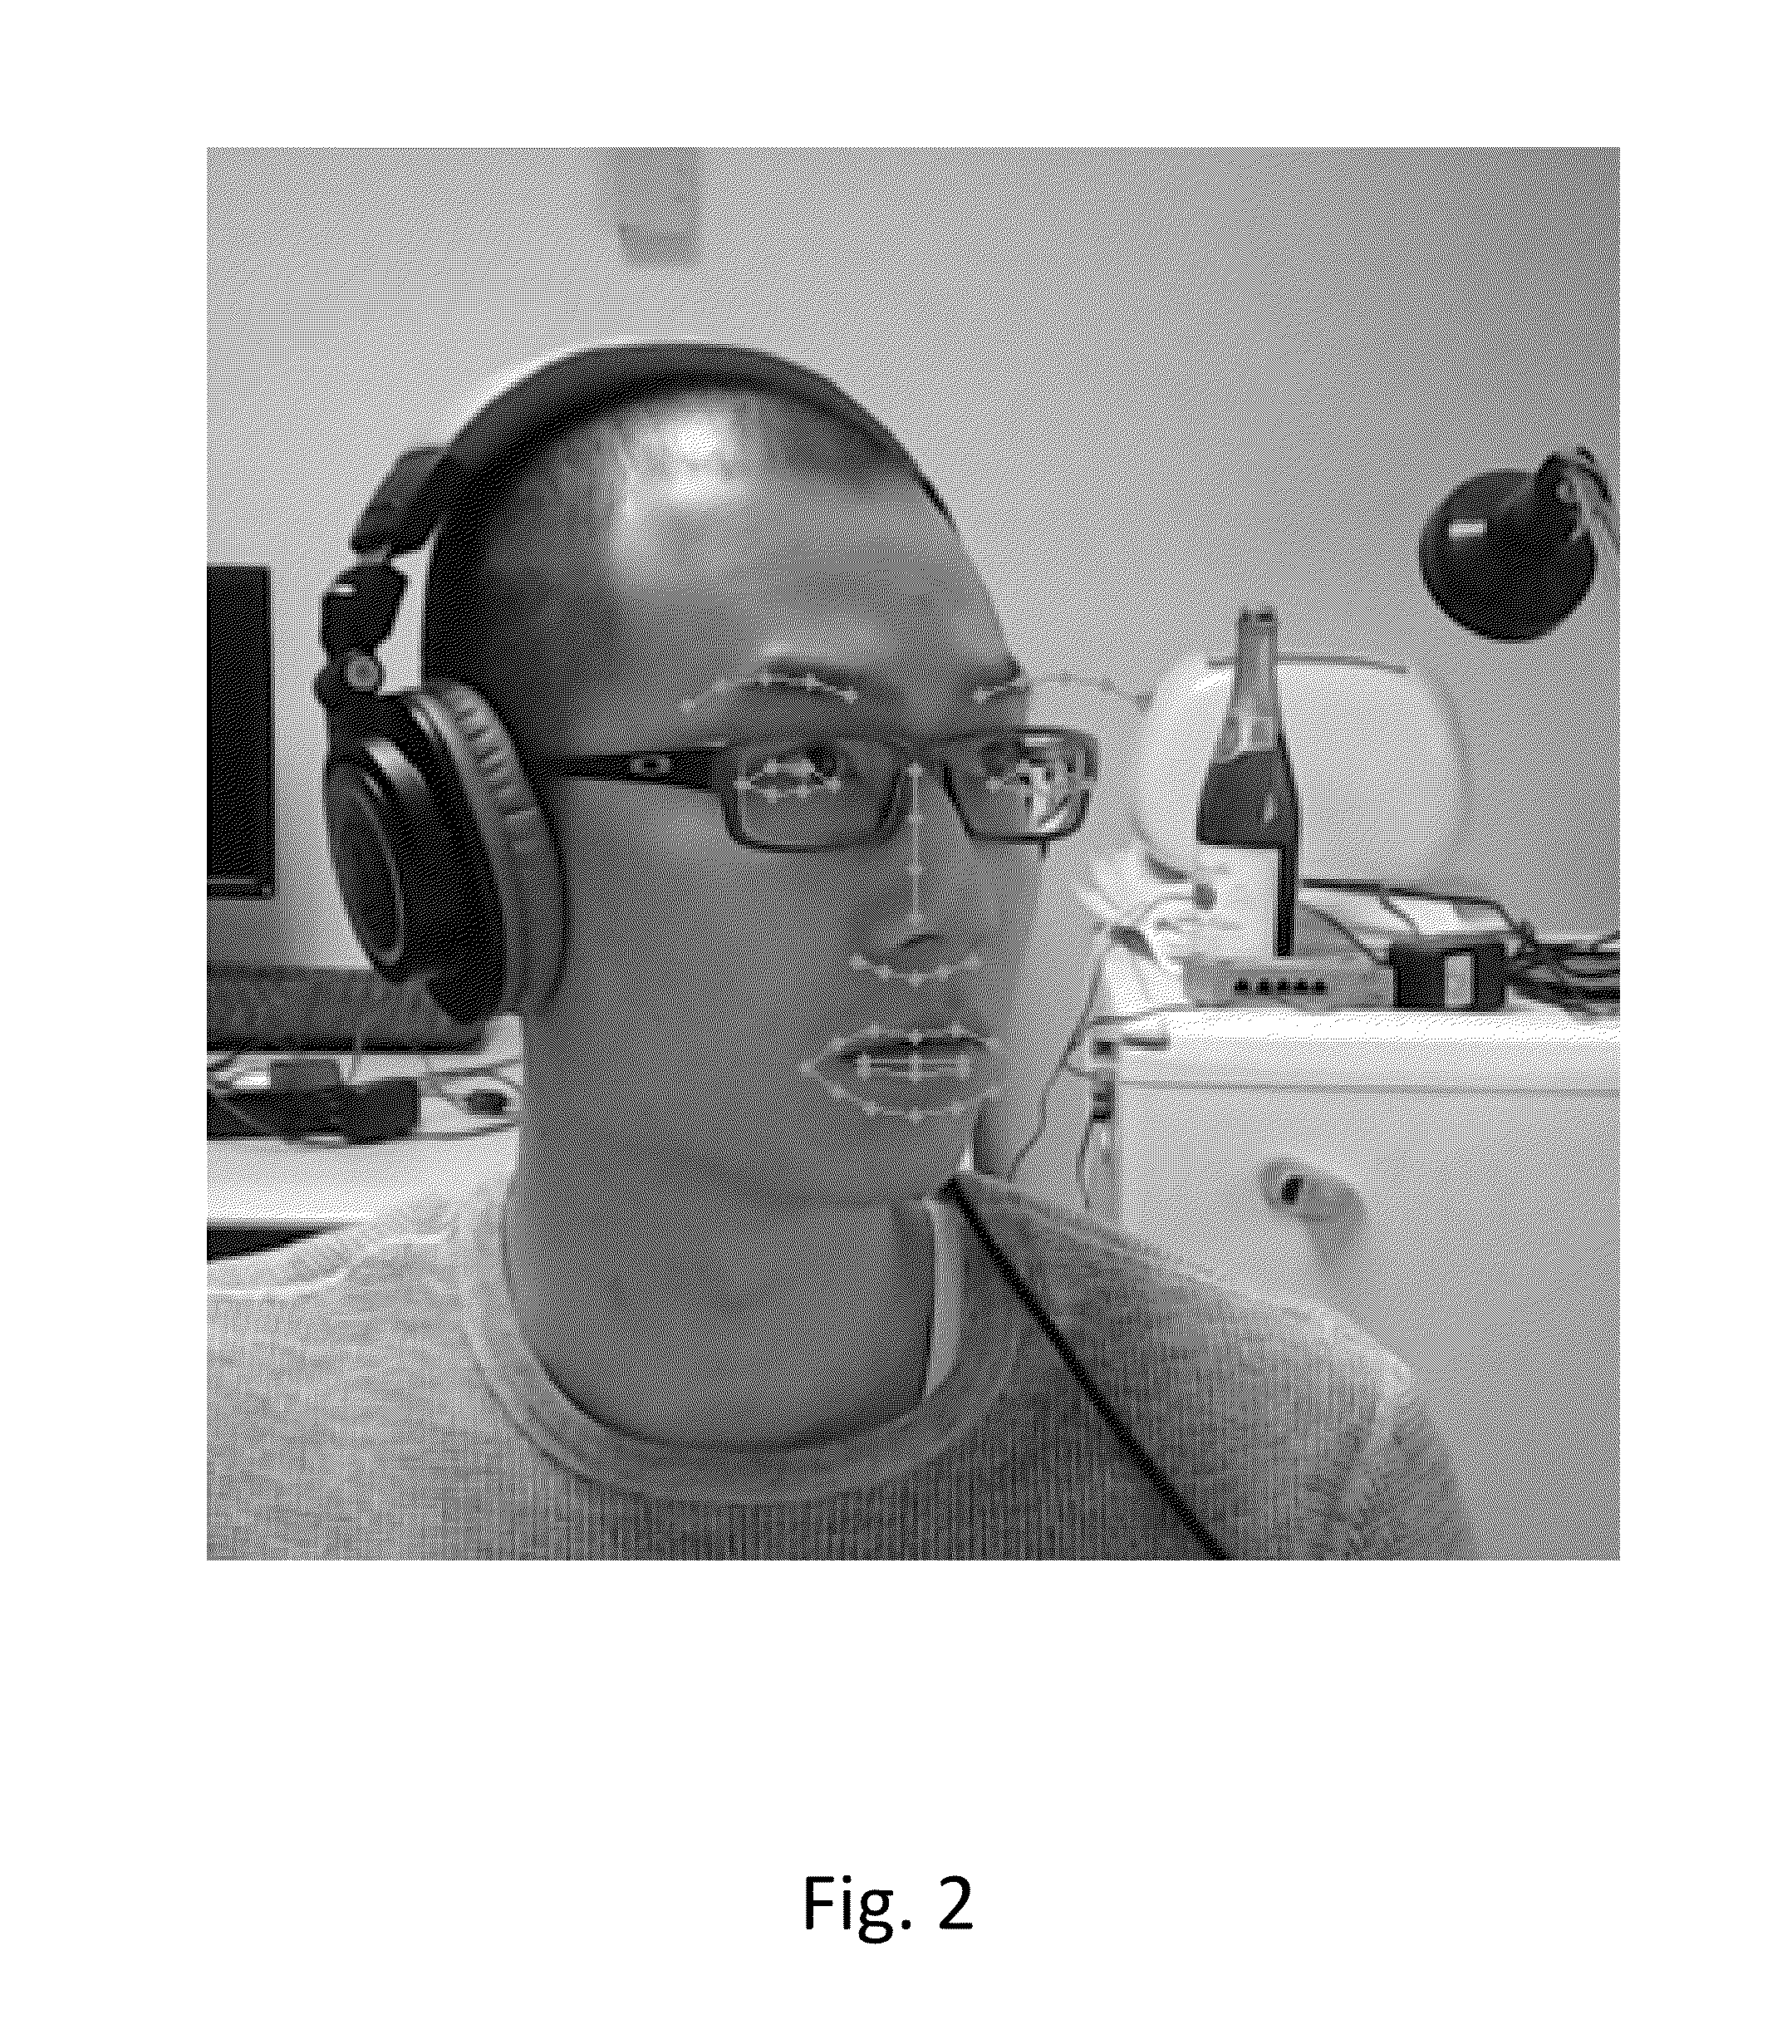 System and Method for Detecting and Tracking Facial Features In Images